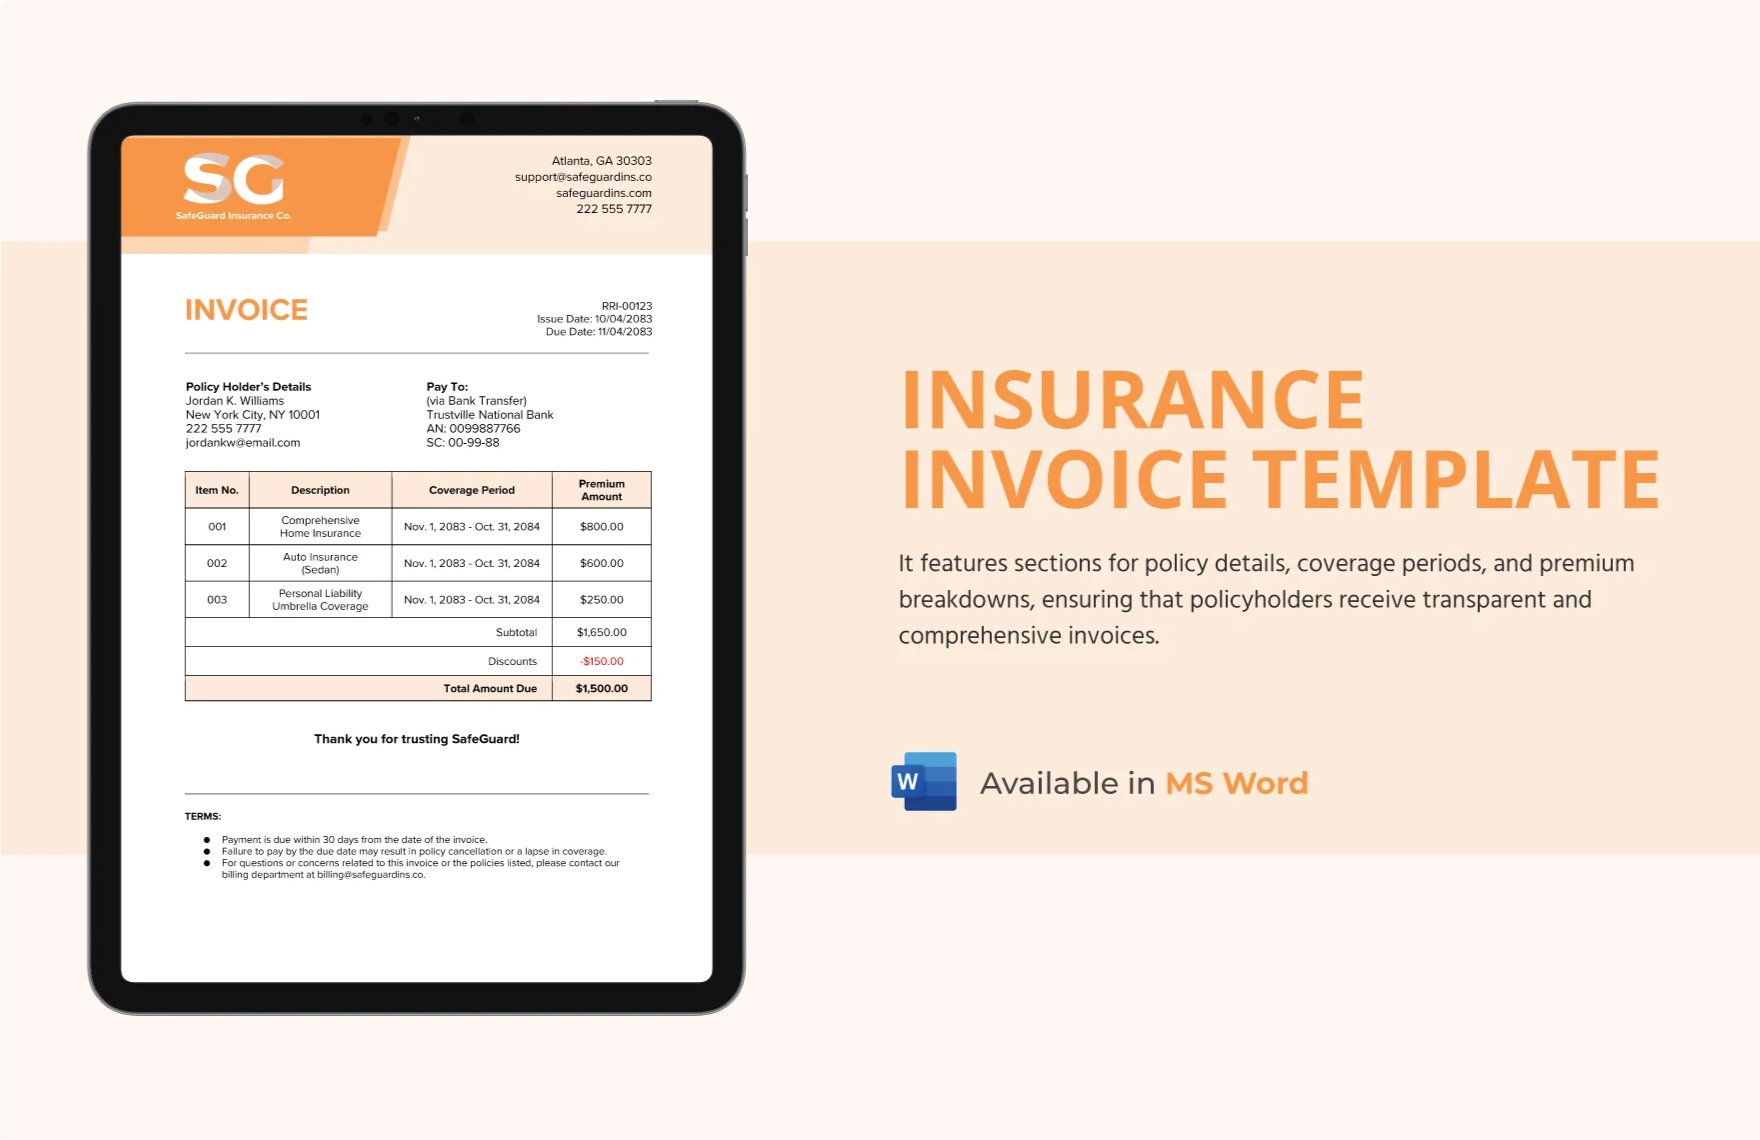 Insurance Invoice Template in Word